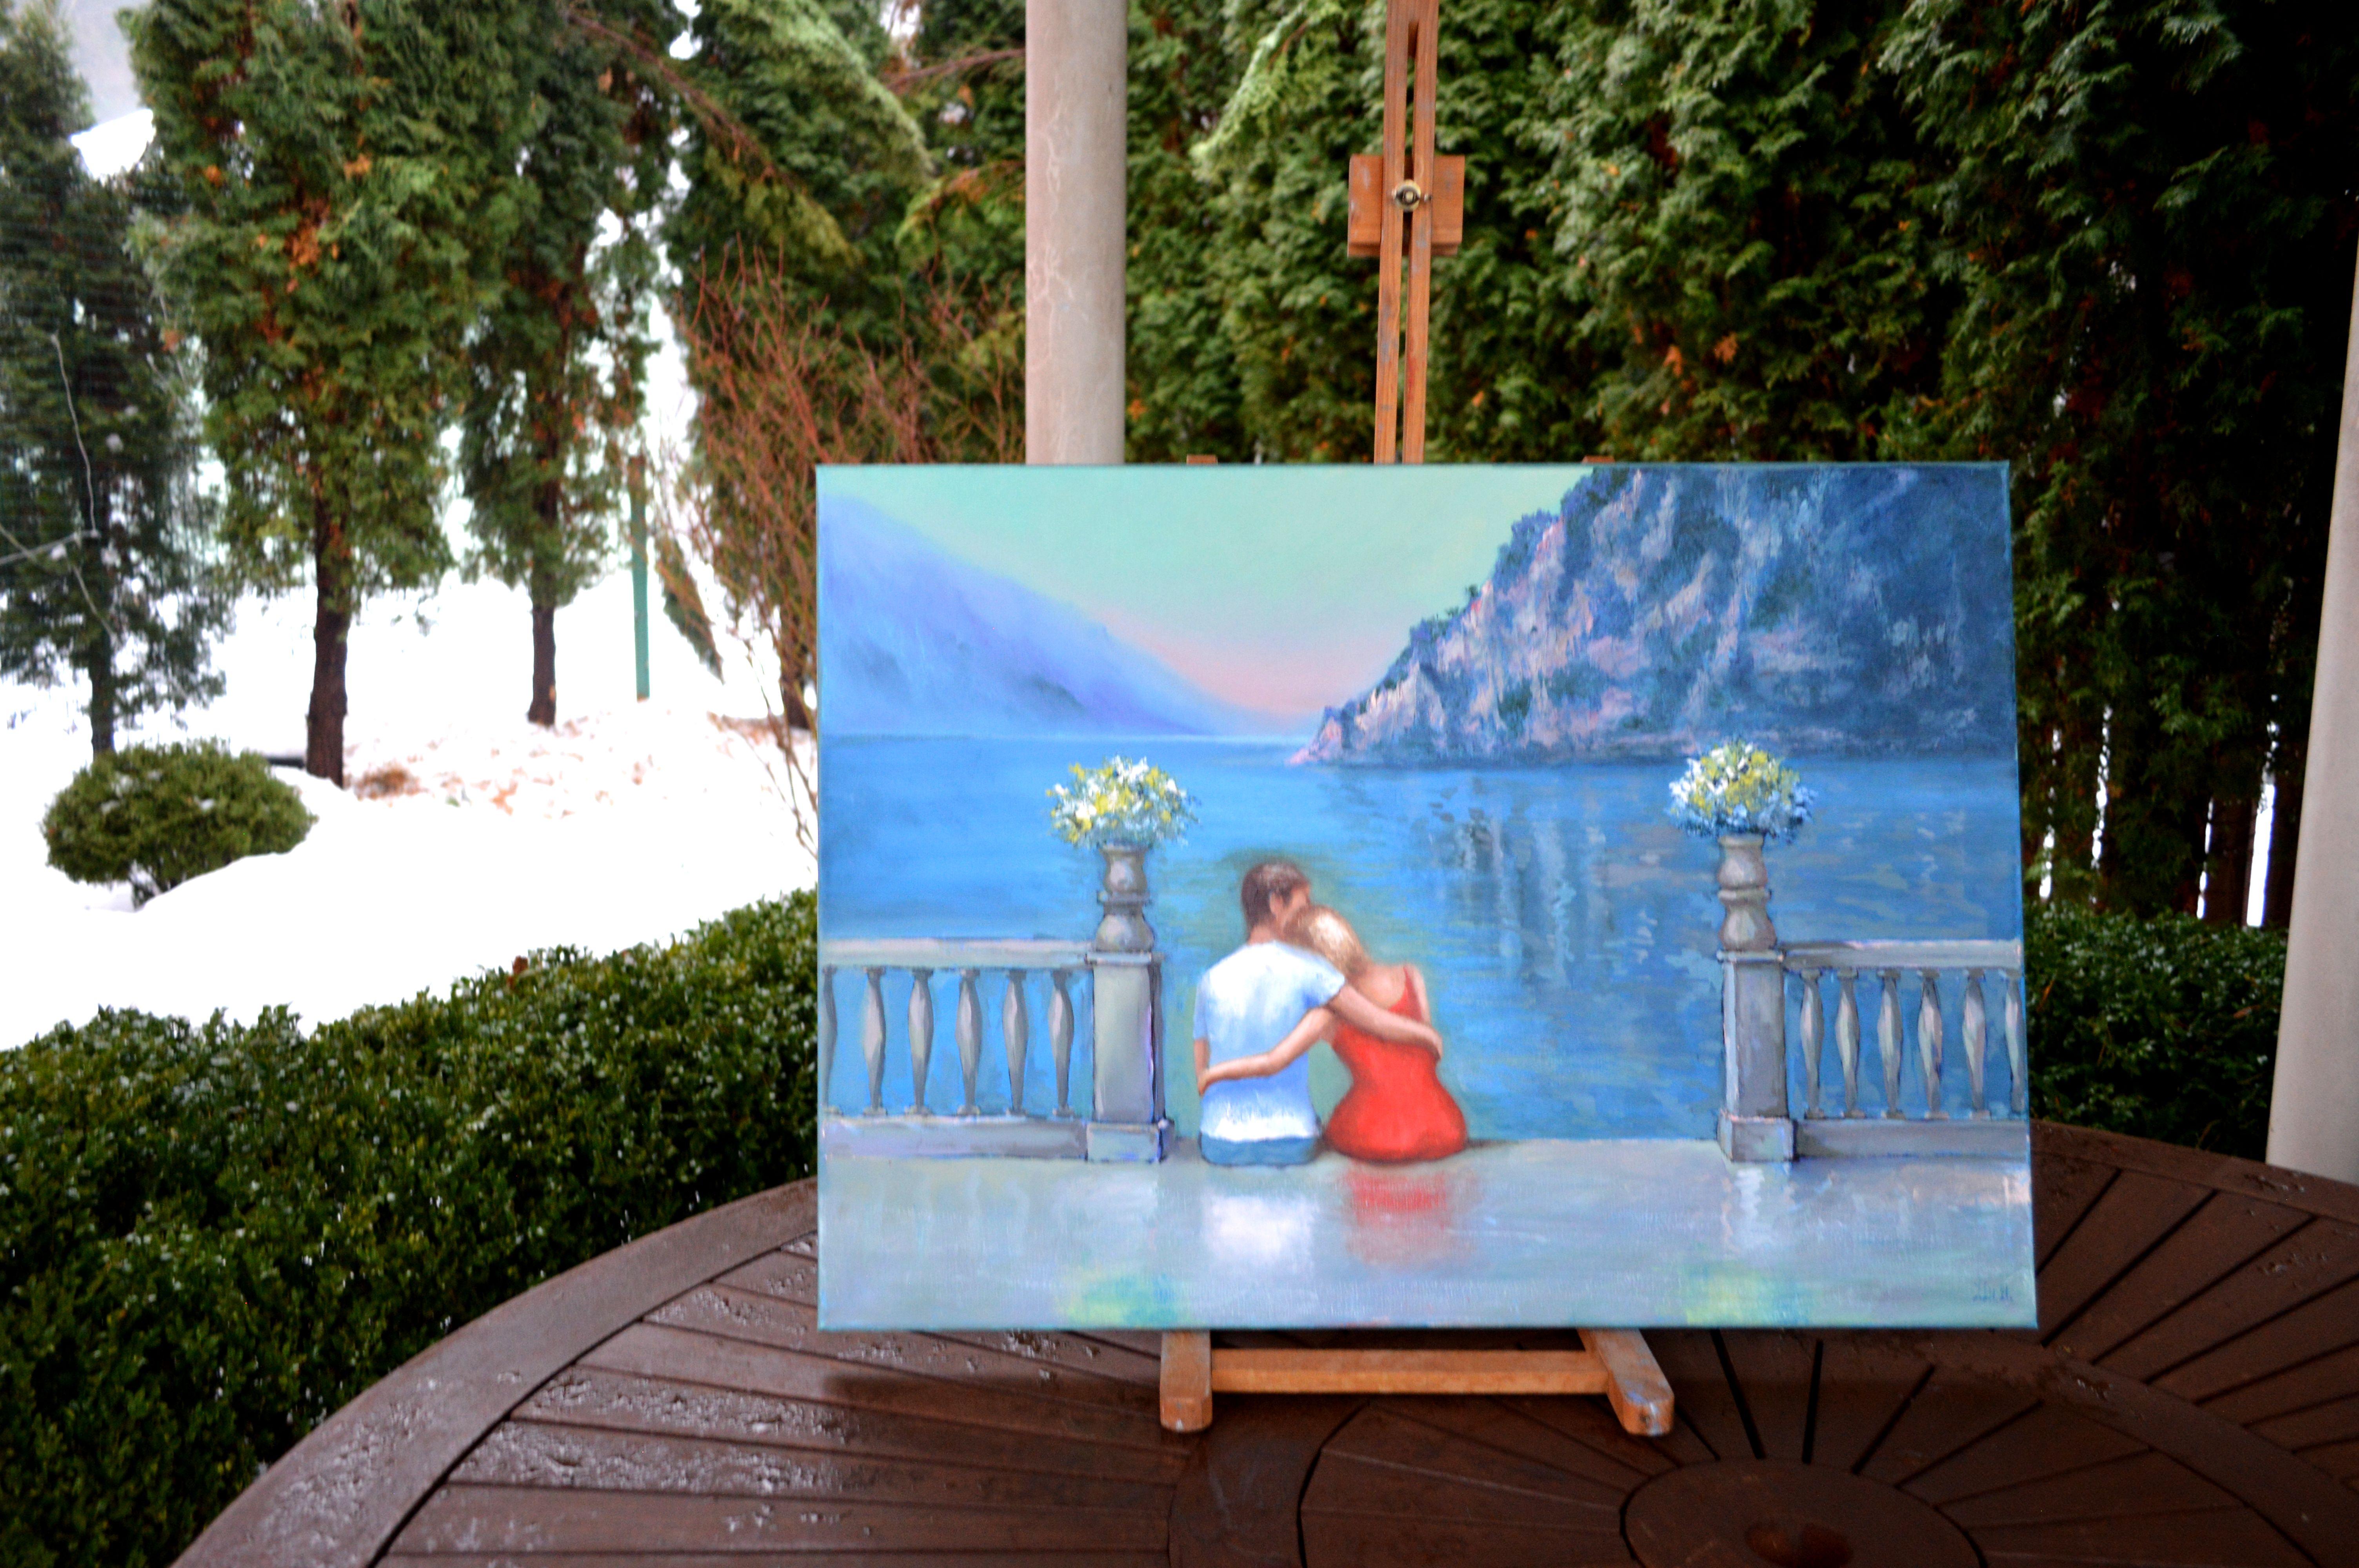 In this oil painting, I've poured my soul into capturing the intimacy of a serene moment shared between two people. The surreal backdrop, blending the majestic beauty of nature with a touch of the ethereal, invites you into a world where love is as